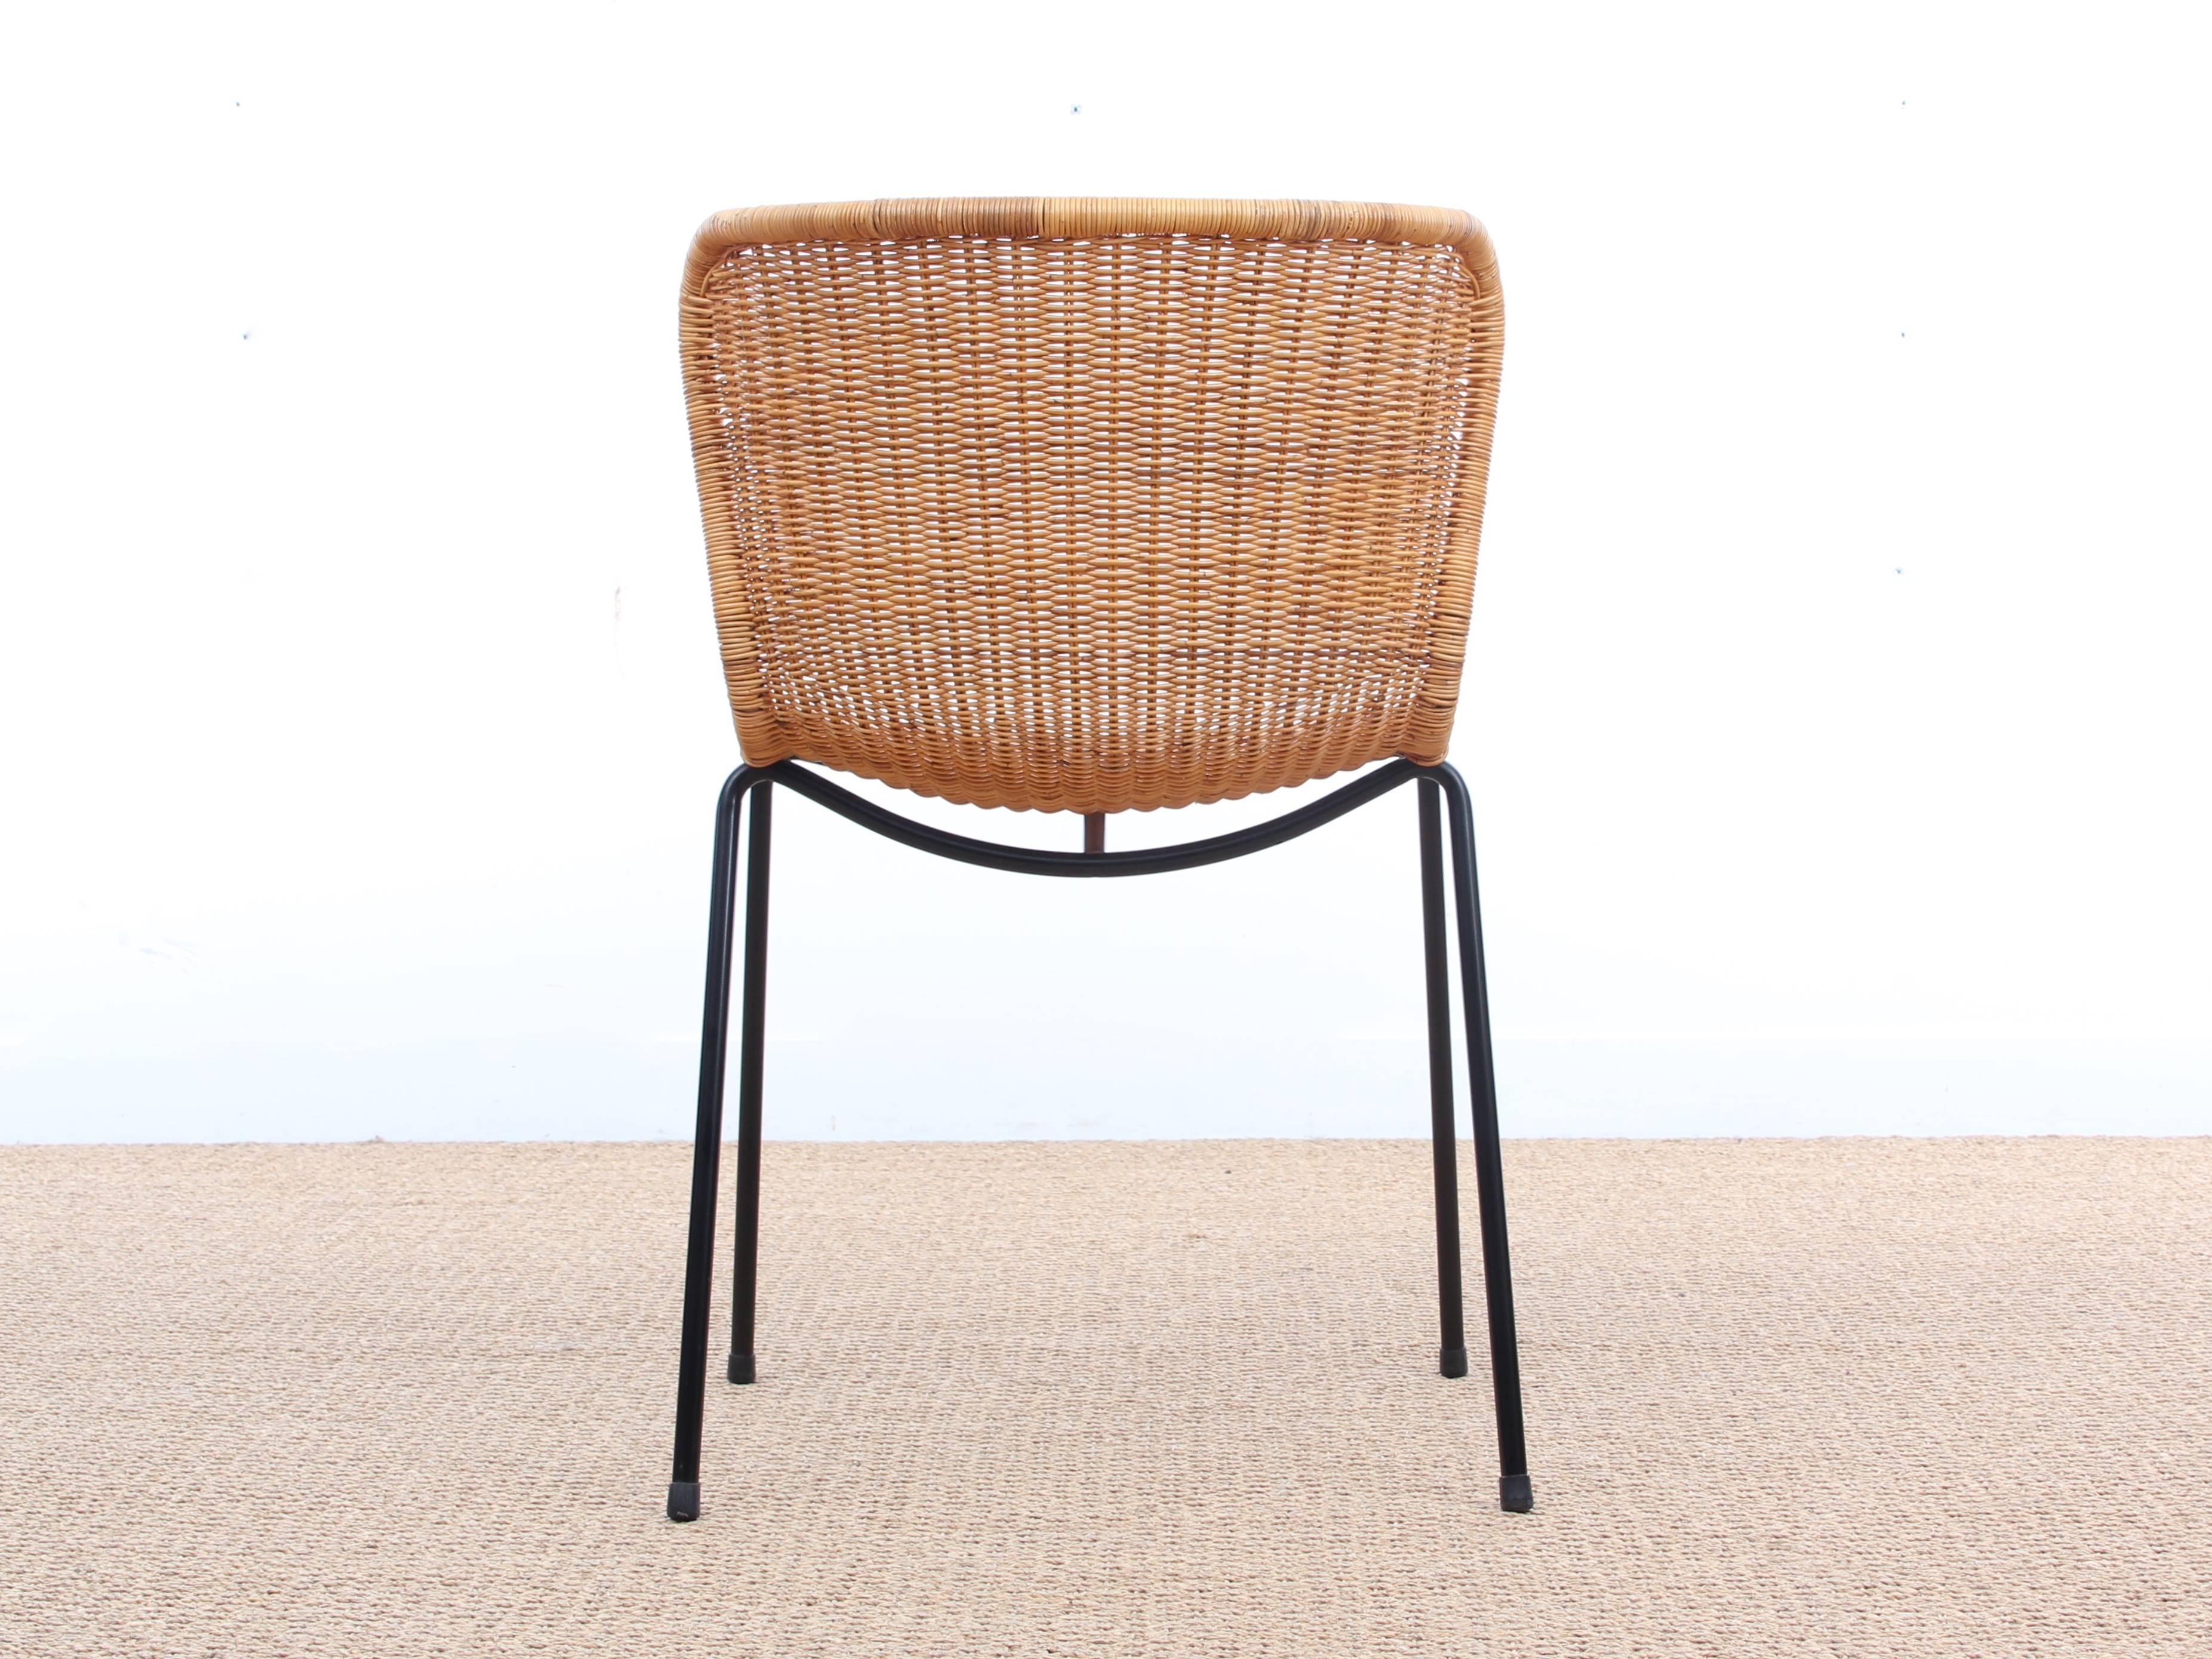 The C603 chair by Japanese designer Yuzuru Yamakawa, designed in the 1960s but still in tune with today's design and comfort requirements. The C603 chair in natural rattan is suitable for both hospitality and residential use. New product, on demand.